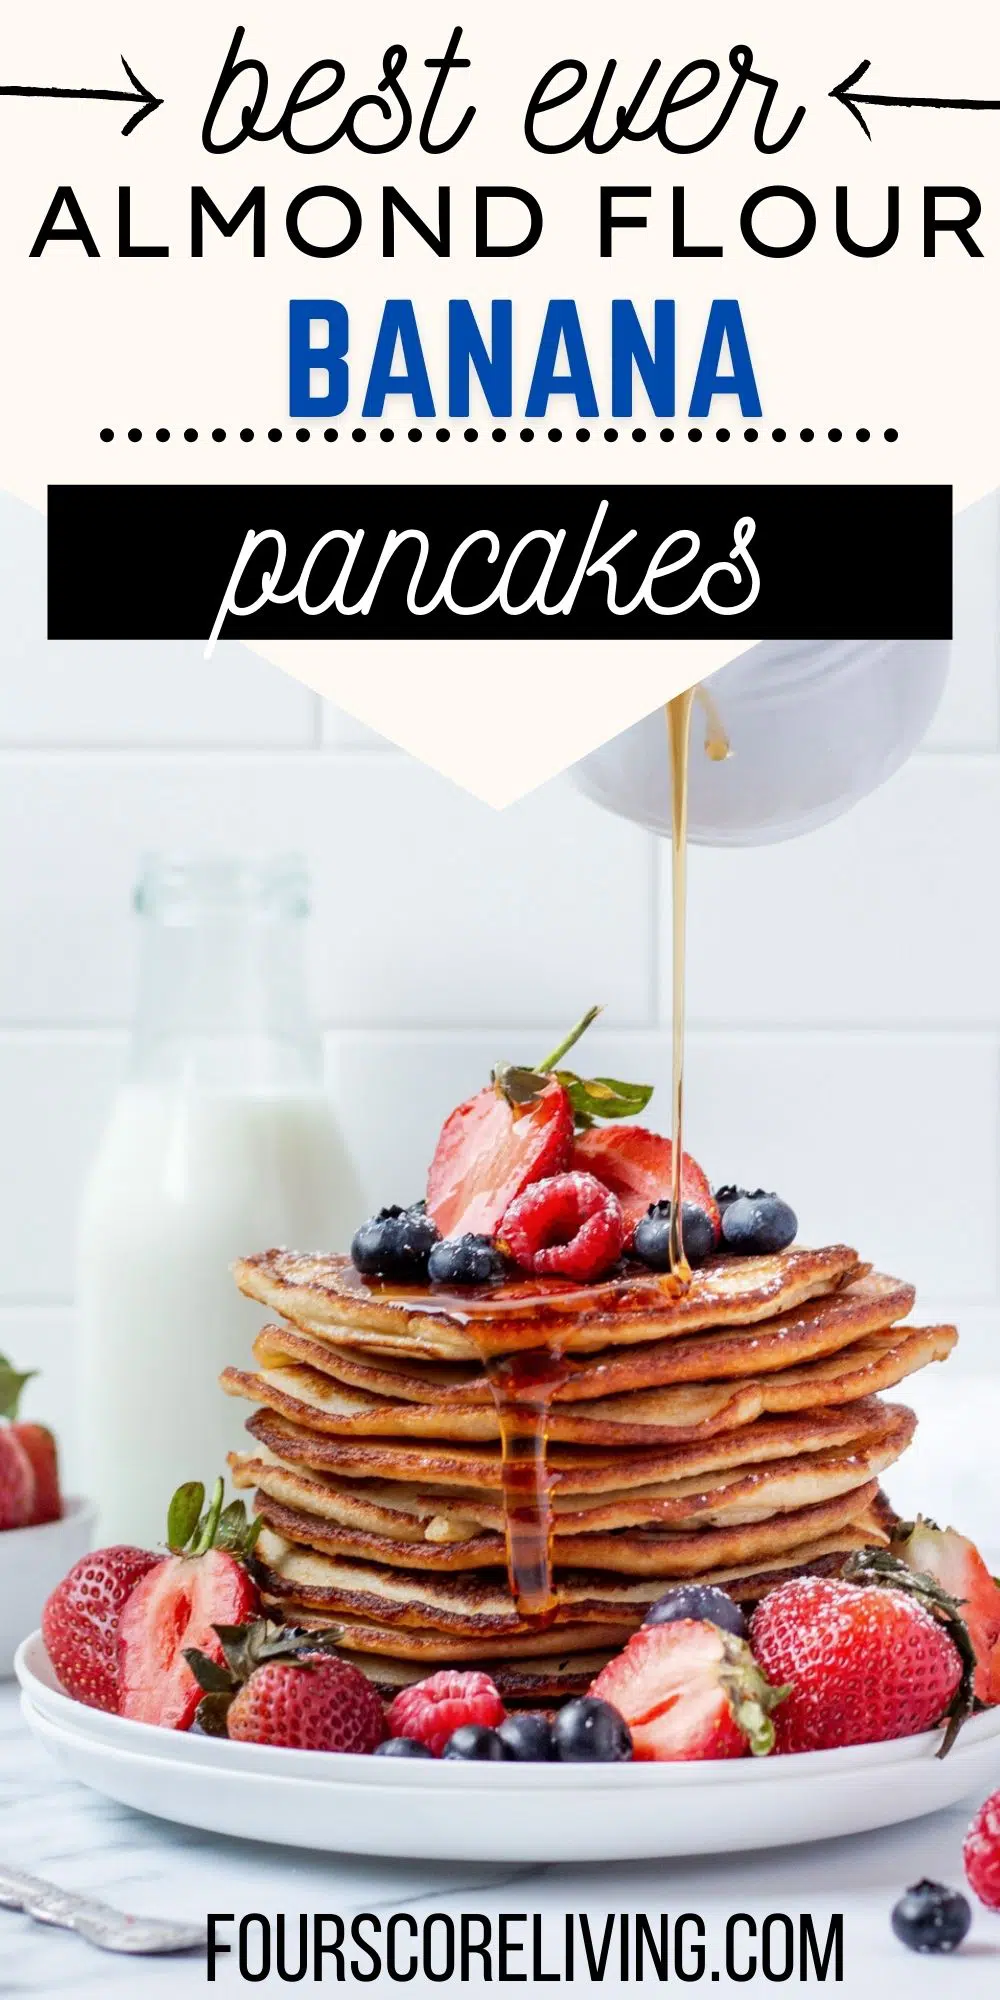 Image of a stack of pancakes garnished with fresh berries. Text overlay says Best ever Almond Flour Banana Pancakes